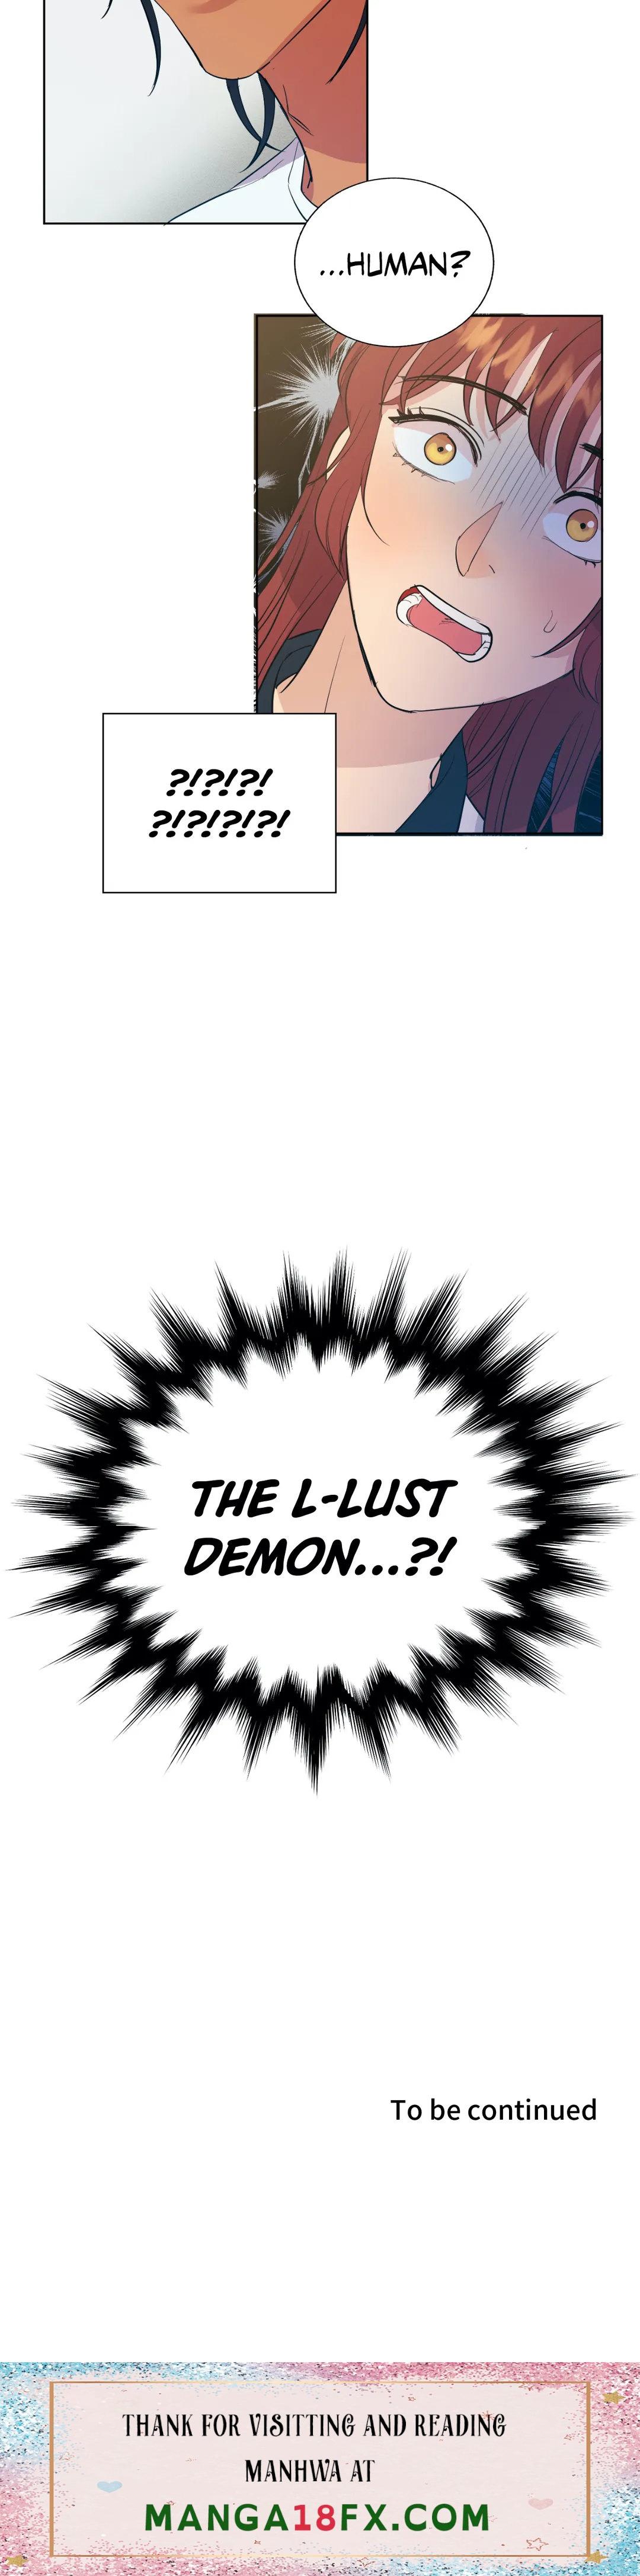 Hana’s Demons of Lust - Chapter 5 Page 26